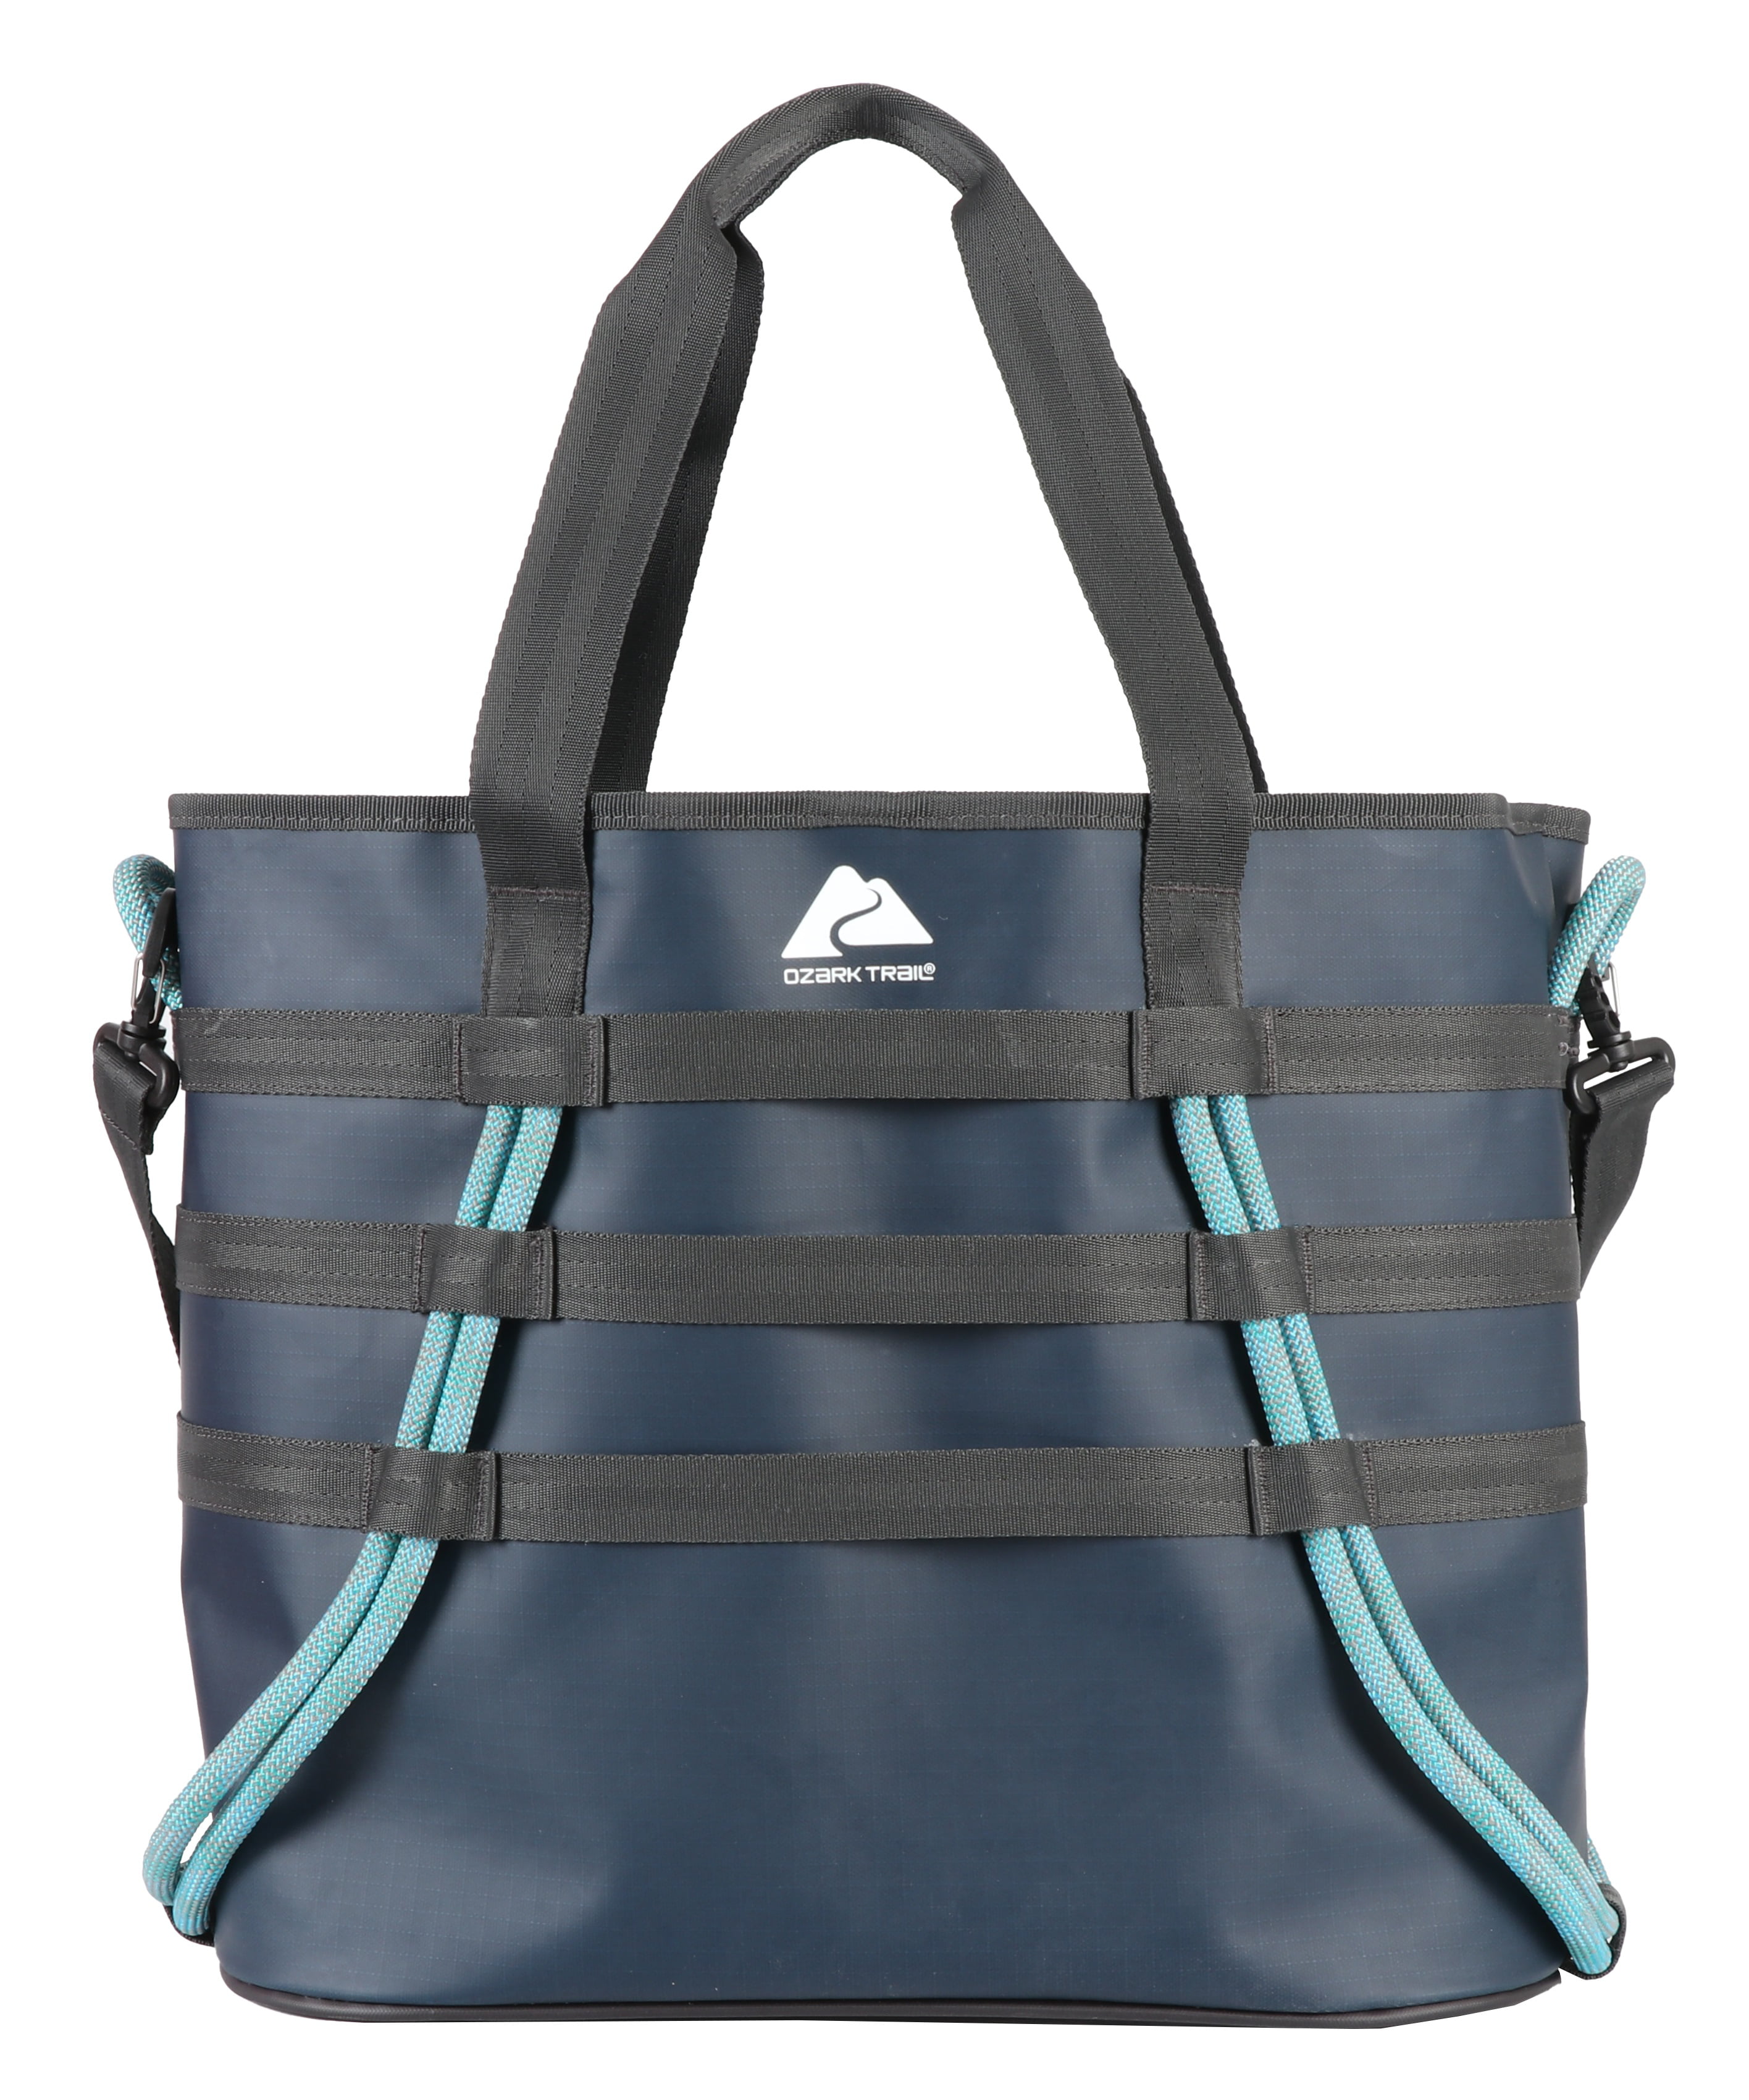 Ozark Trail Adult Durable Camping Carry-All Tote Handbag (Blue) $14.97 + Free Shipping w/ Walmart+ or $35+